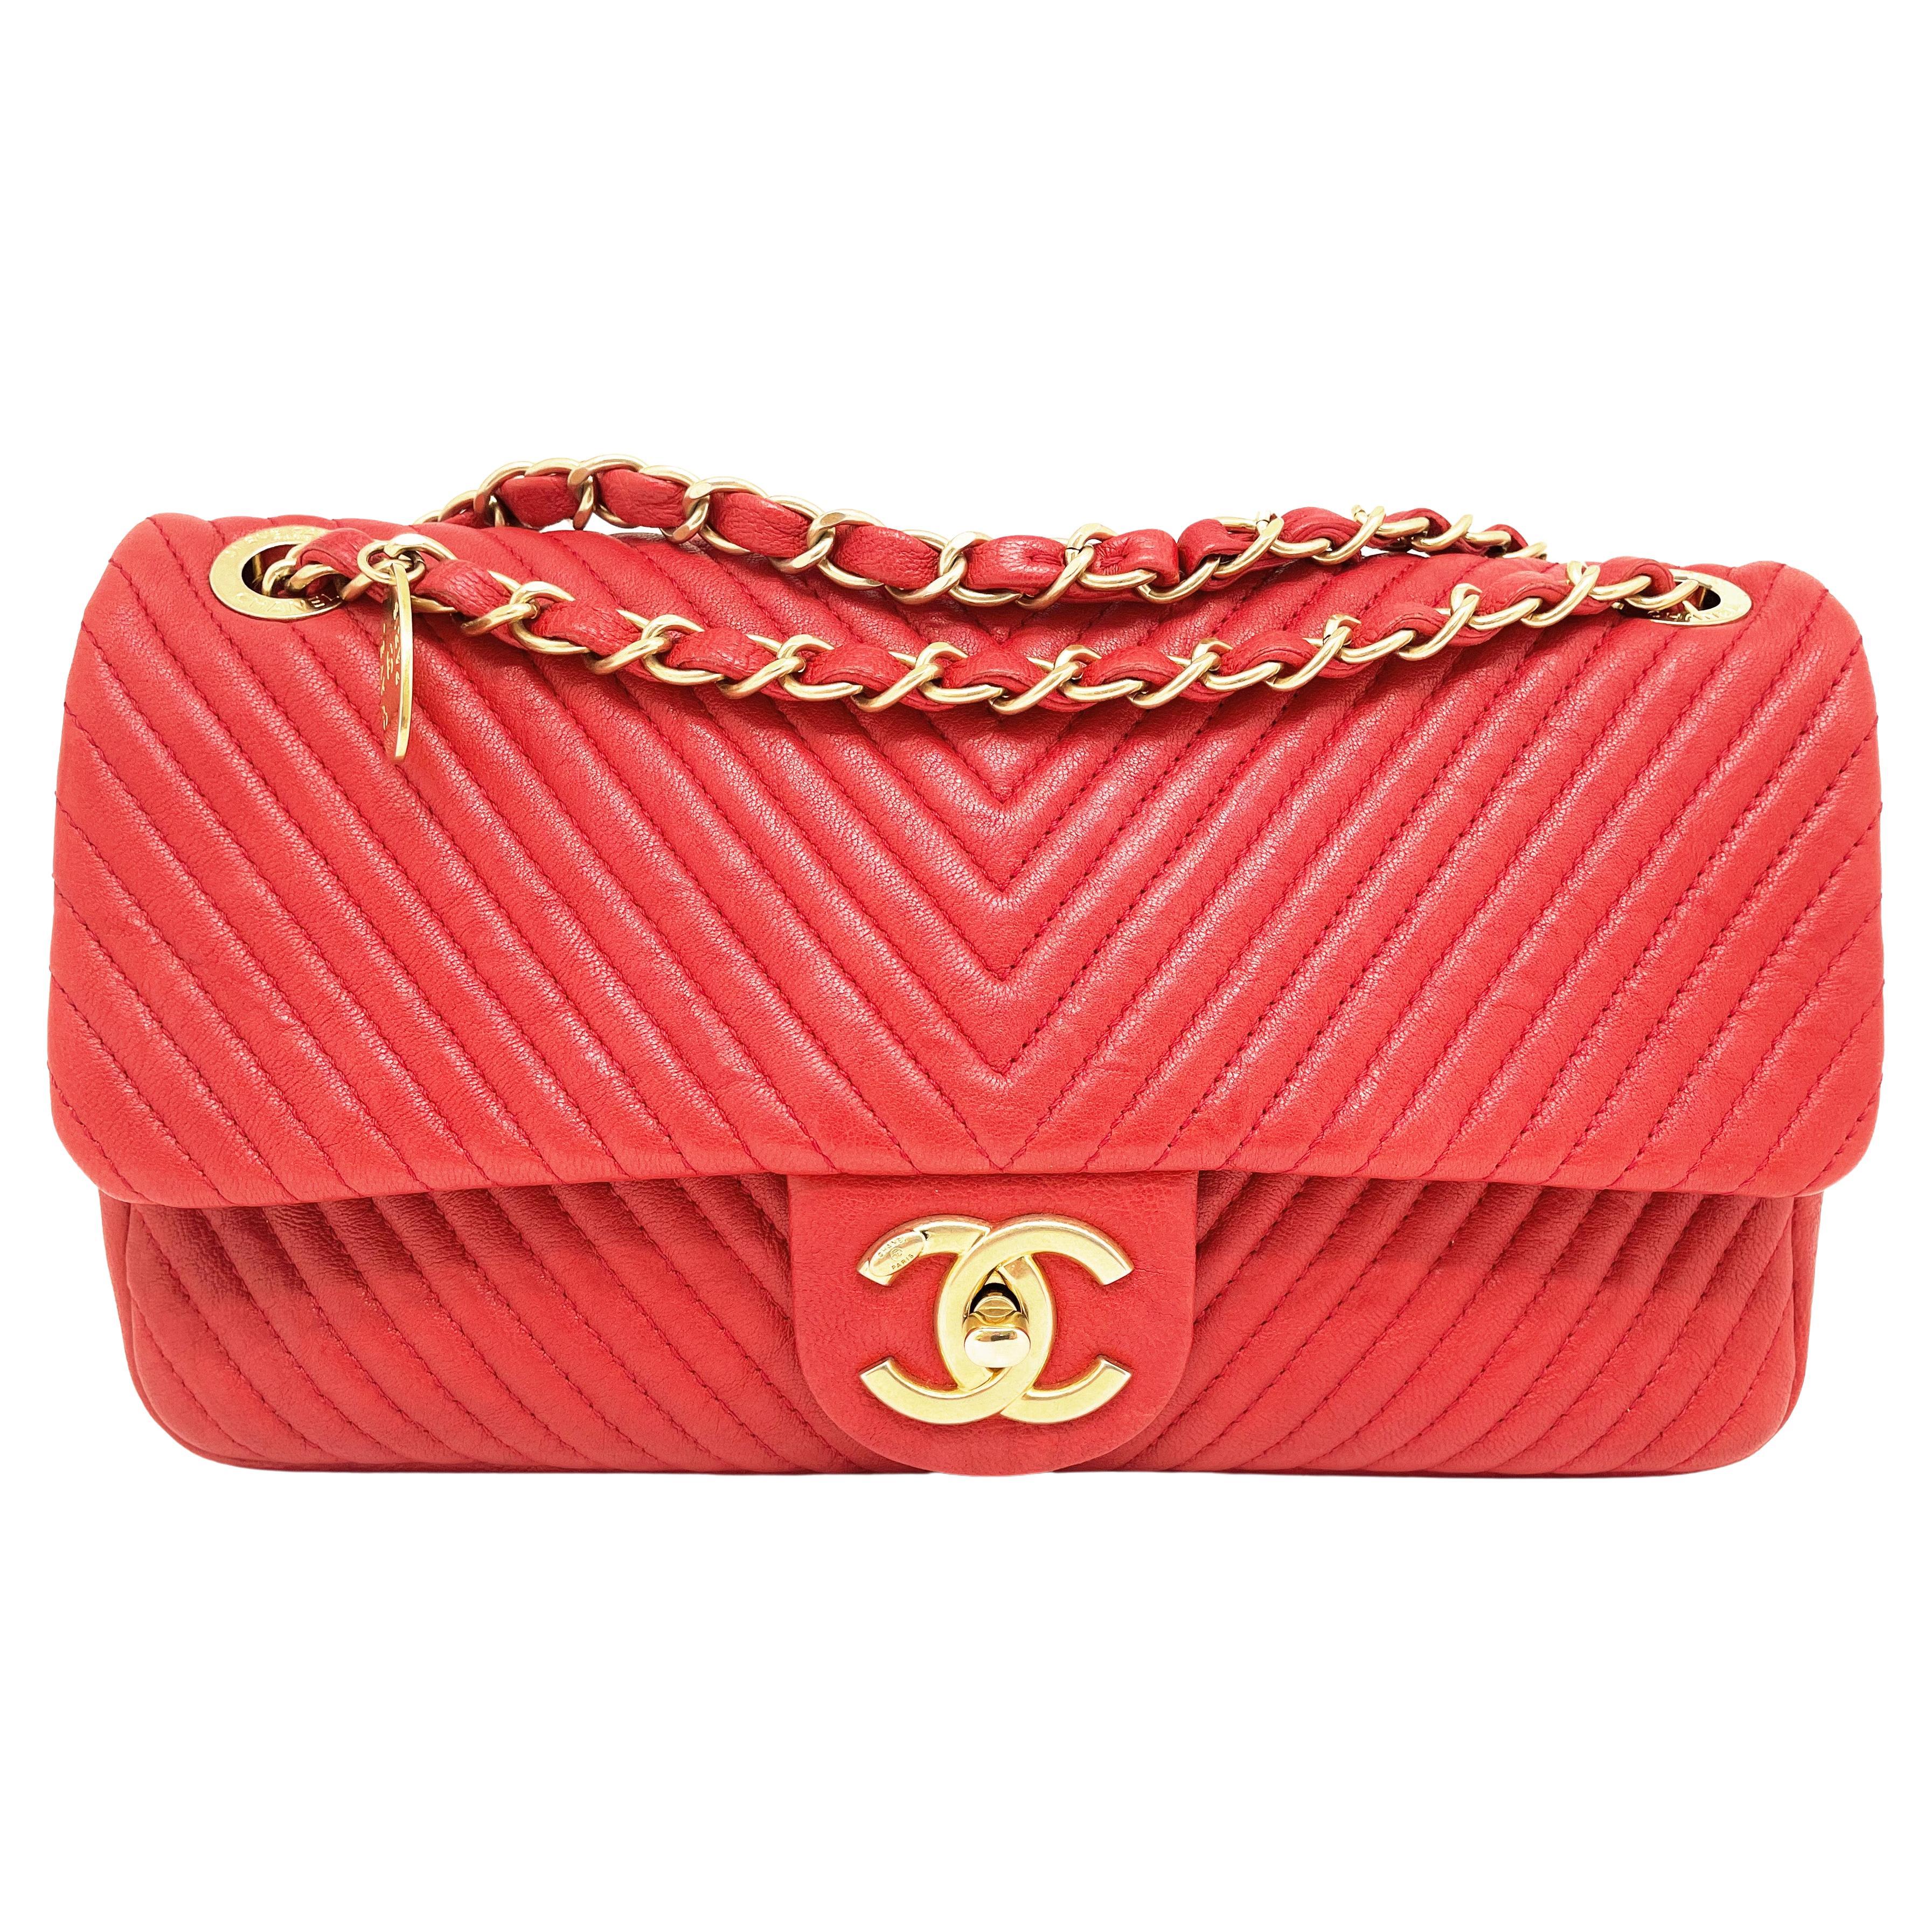 Superb Chanel 27 cm bag in leather and Valentine Red Chevron pattern For Sale